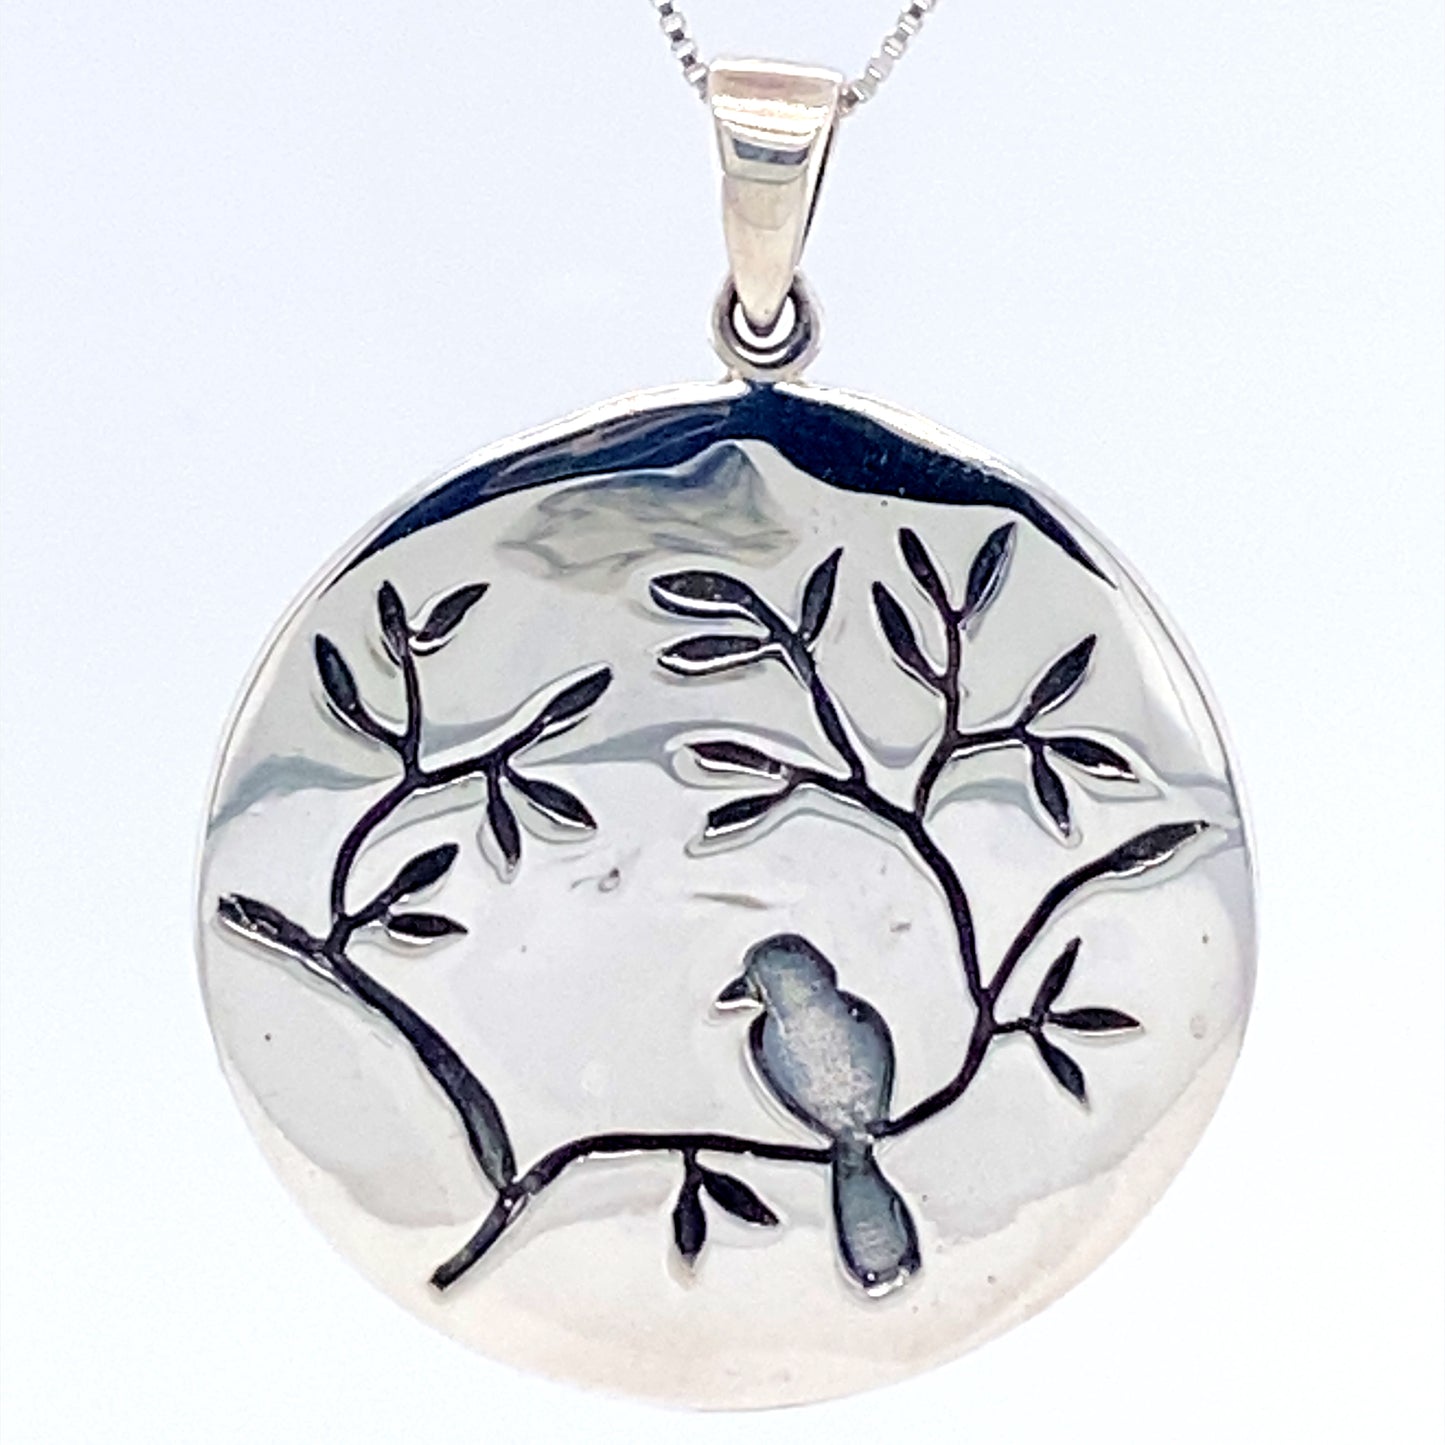 A Large Circle Nature Pendant with Bird featuring a bird perched on a branch by Super Silver.